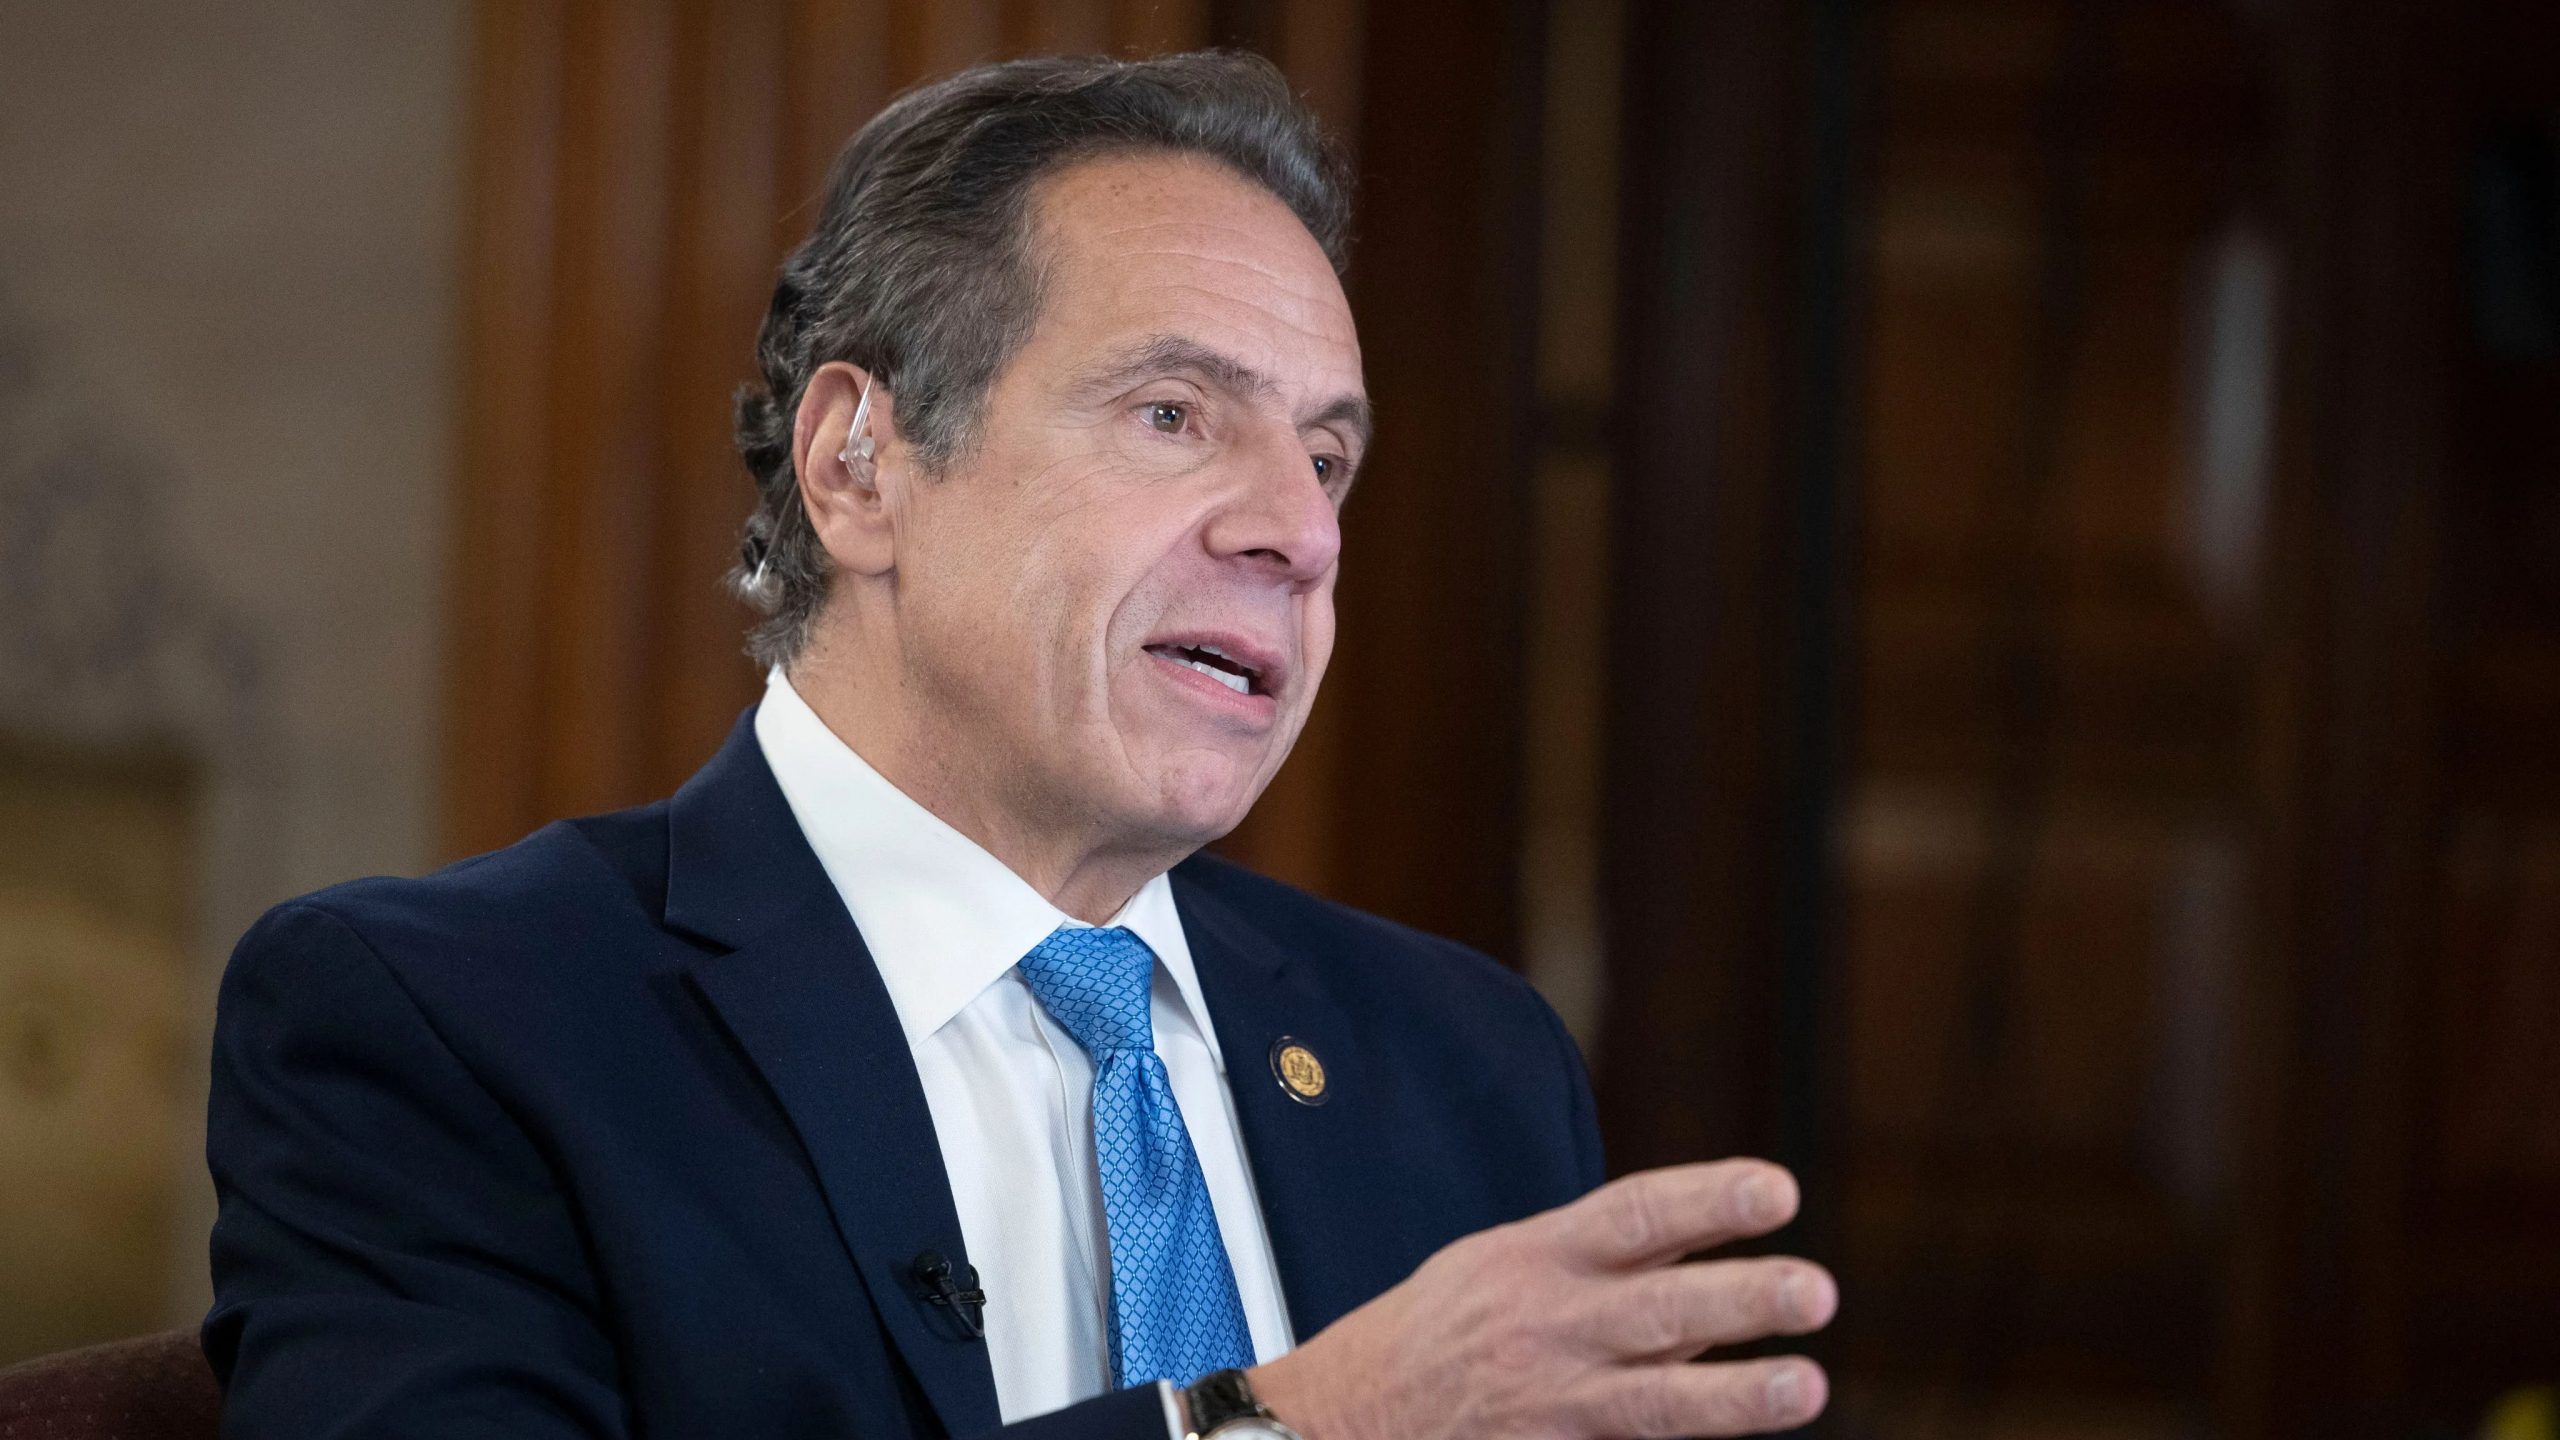 New York Governor compared me to her ex-girlfriends: Former aide